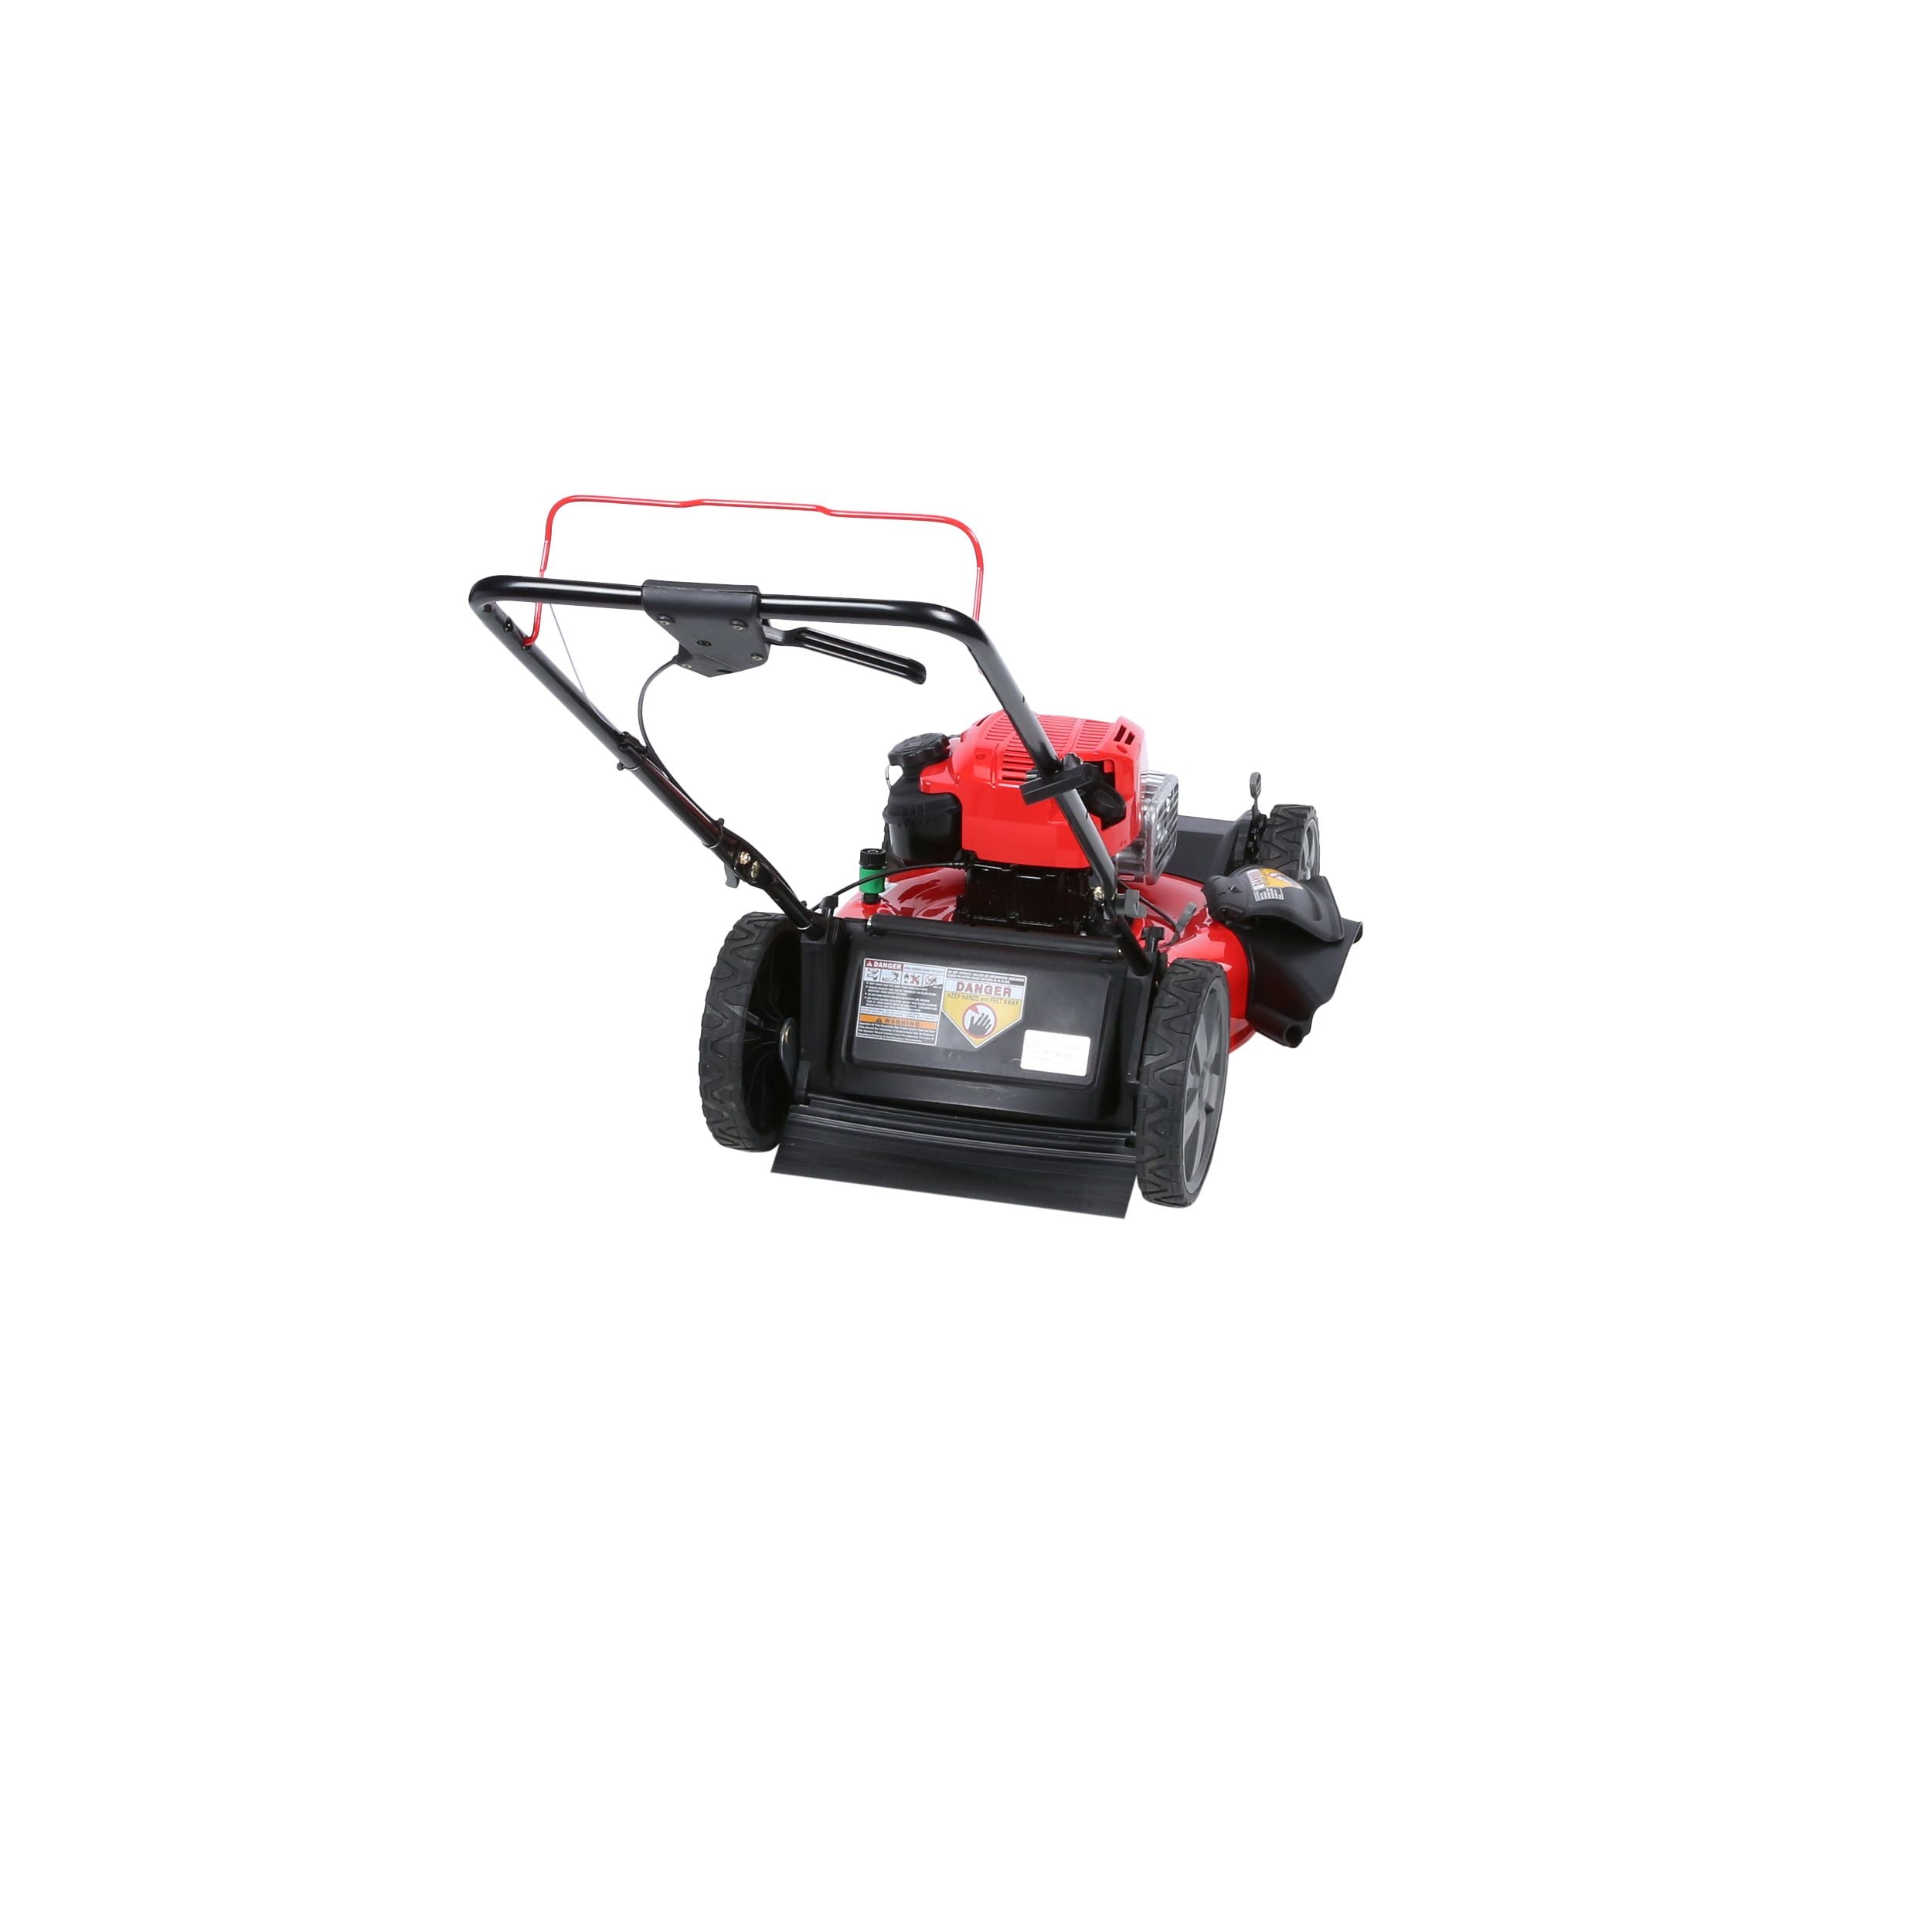 CRAFTSMAN M230 163-cc 21-in Self-Propelled Gas Lawn Mower with 